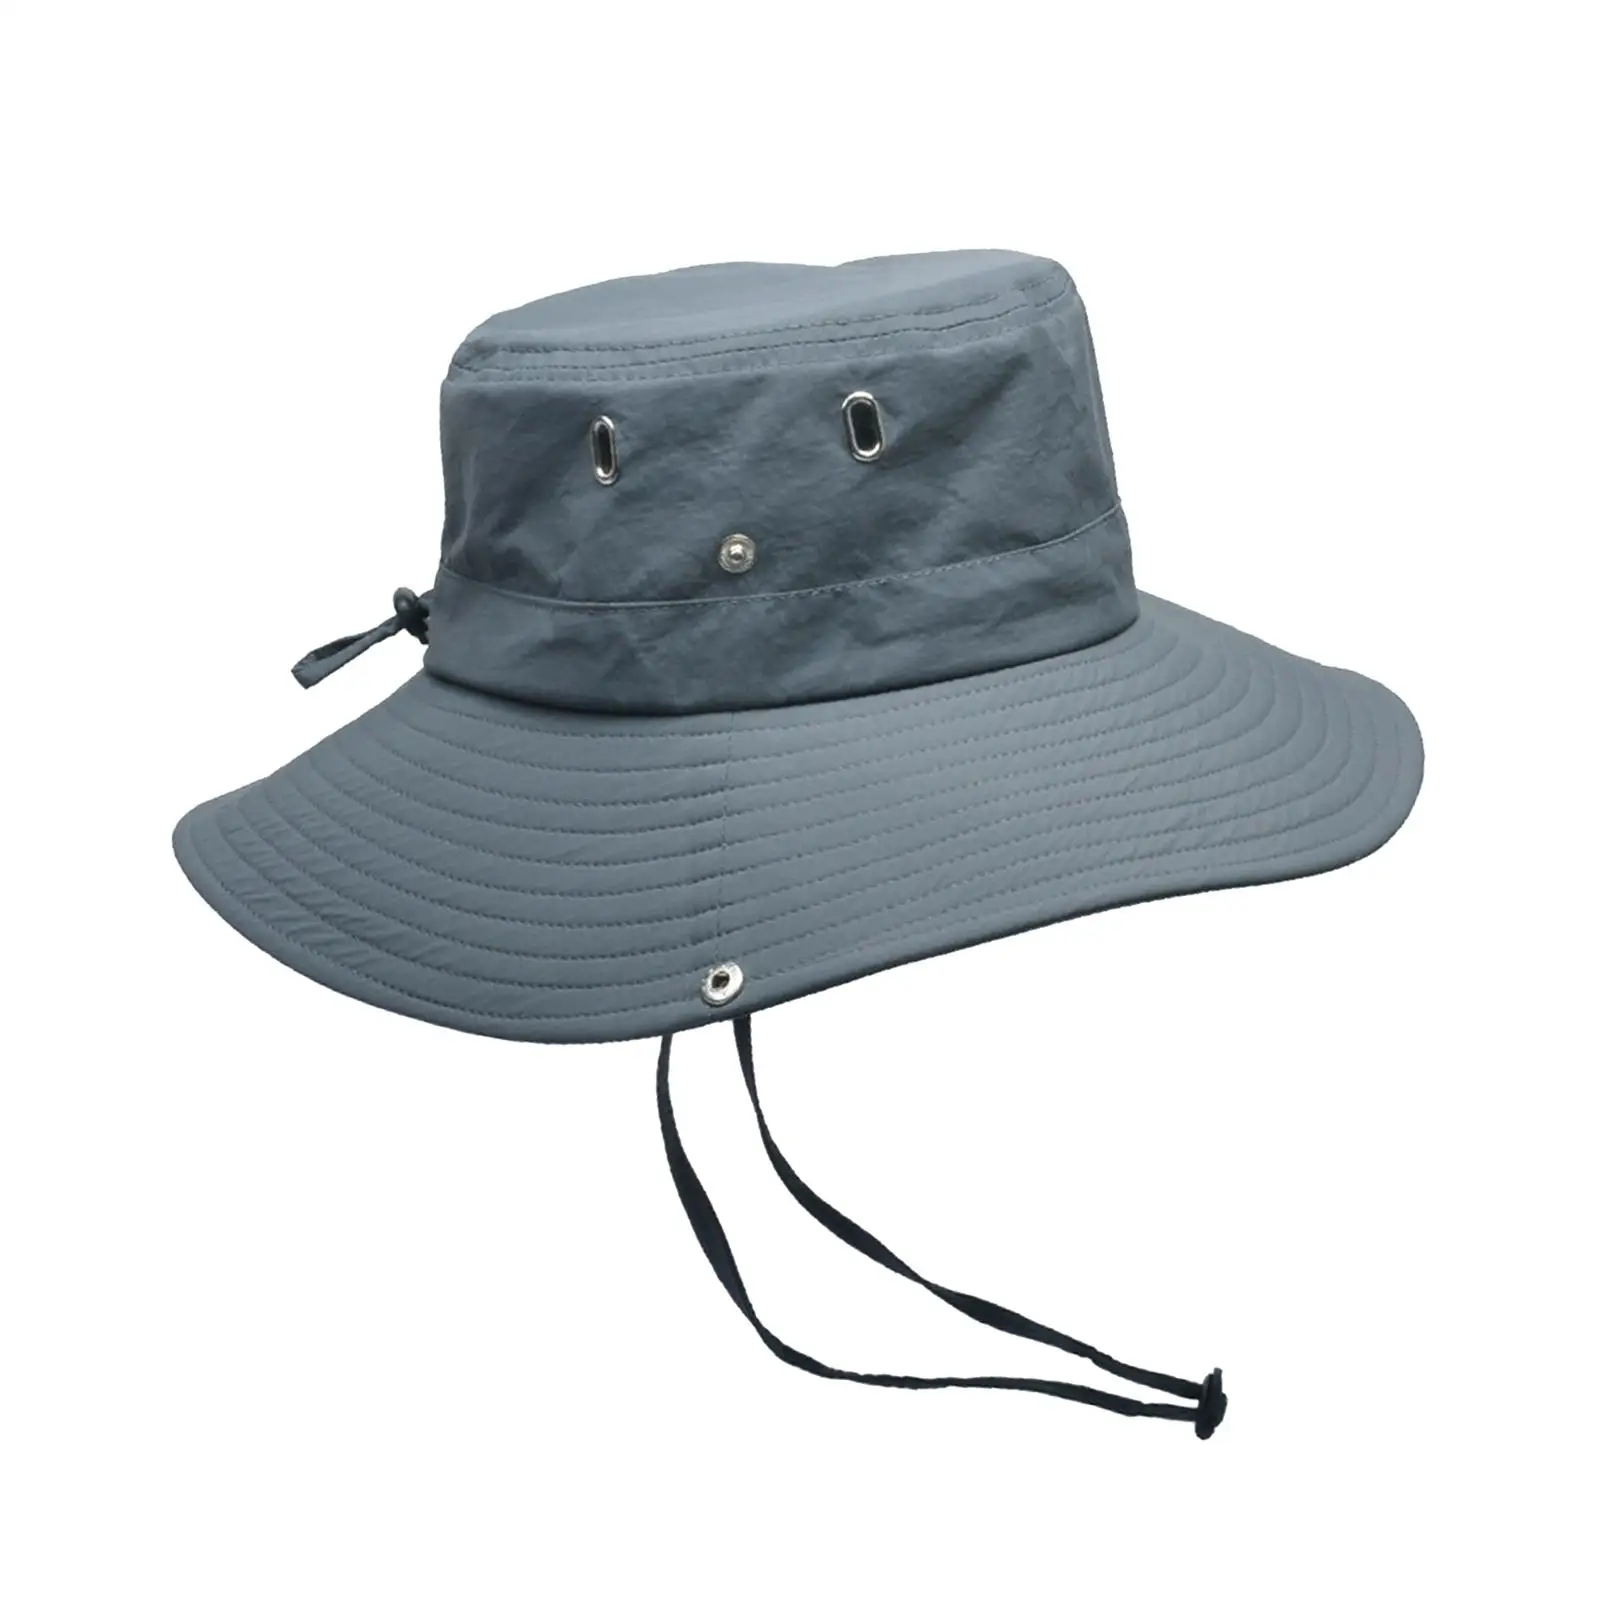 Bucket Hat Wide Brim Polyester Fashion Sun Hats for Camping Travel Outdoor Fishing